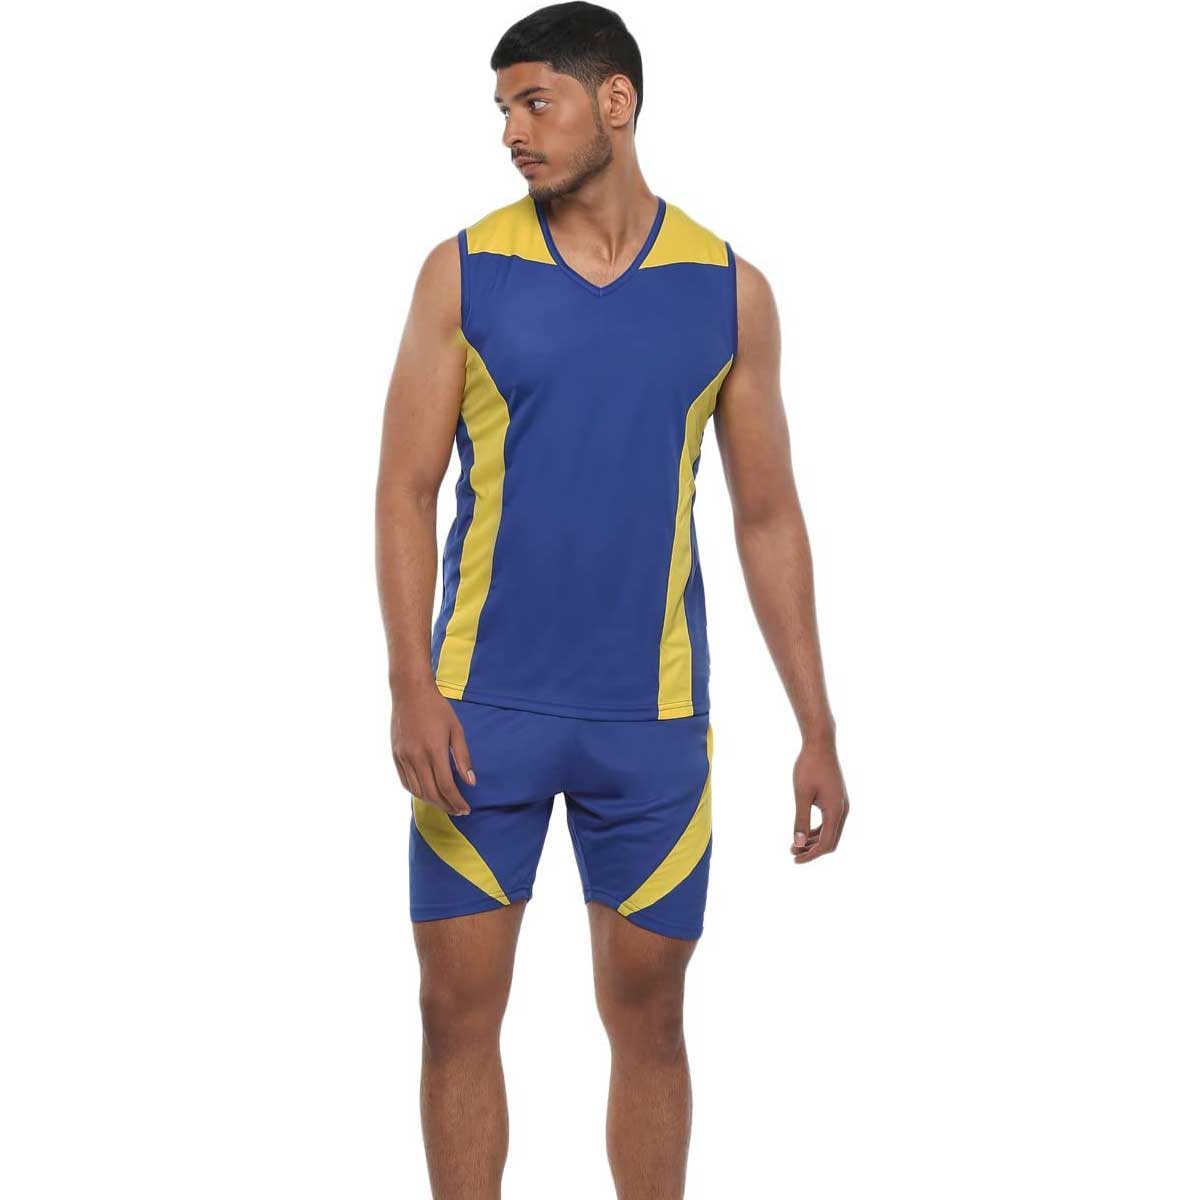 Cut and Sew Volleyball Jersey Manufacturers in China